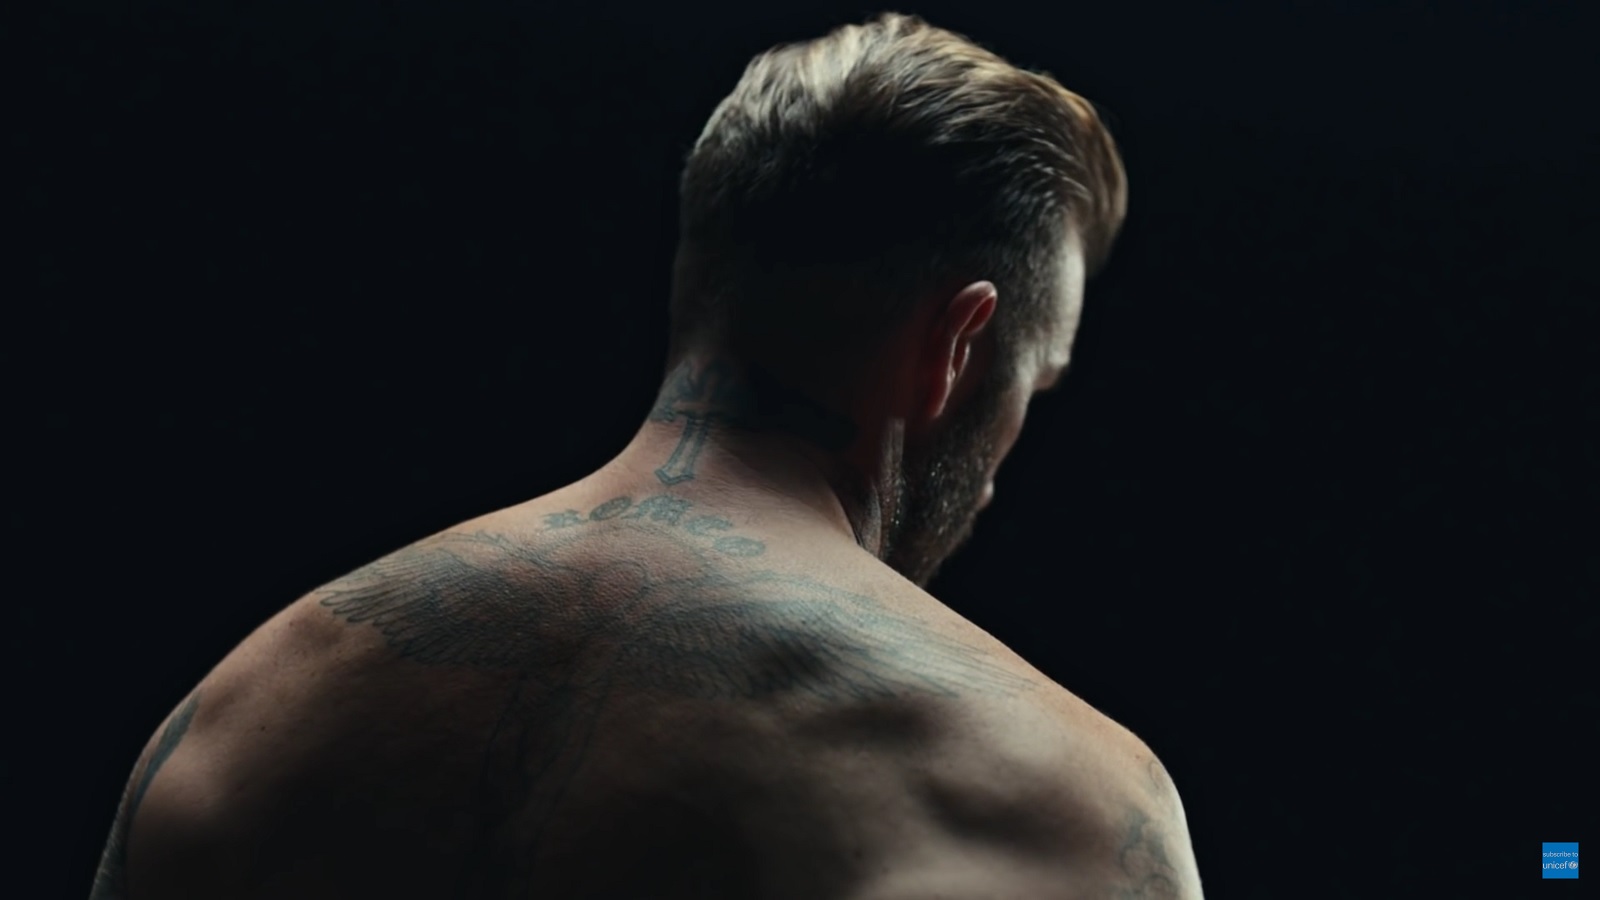 UNICEF Uses David Beckham’s Body to Get Across a Message About Violence